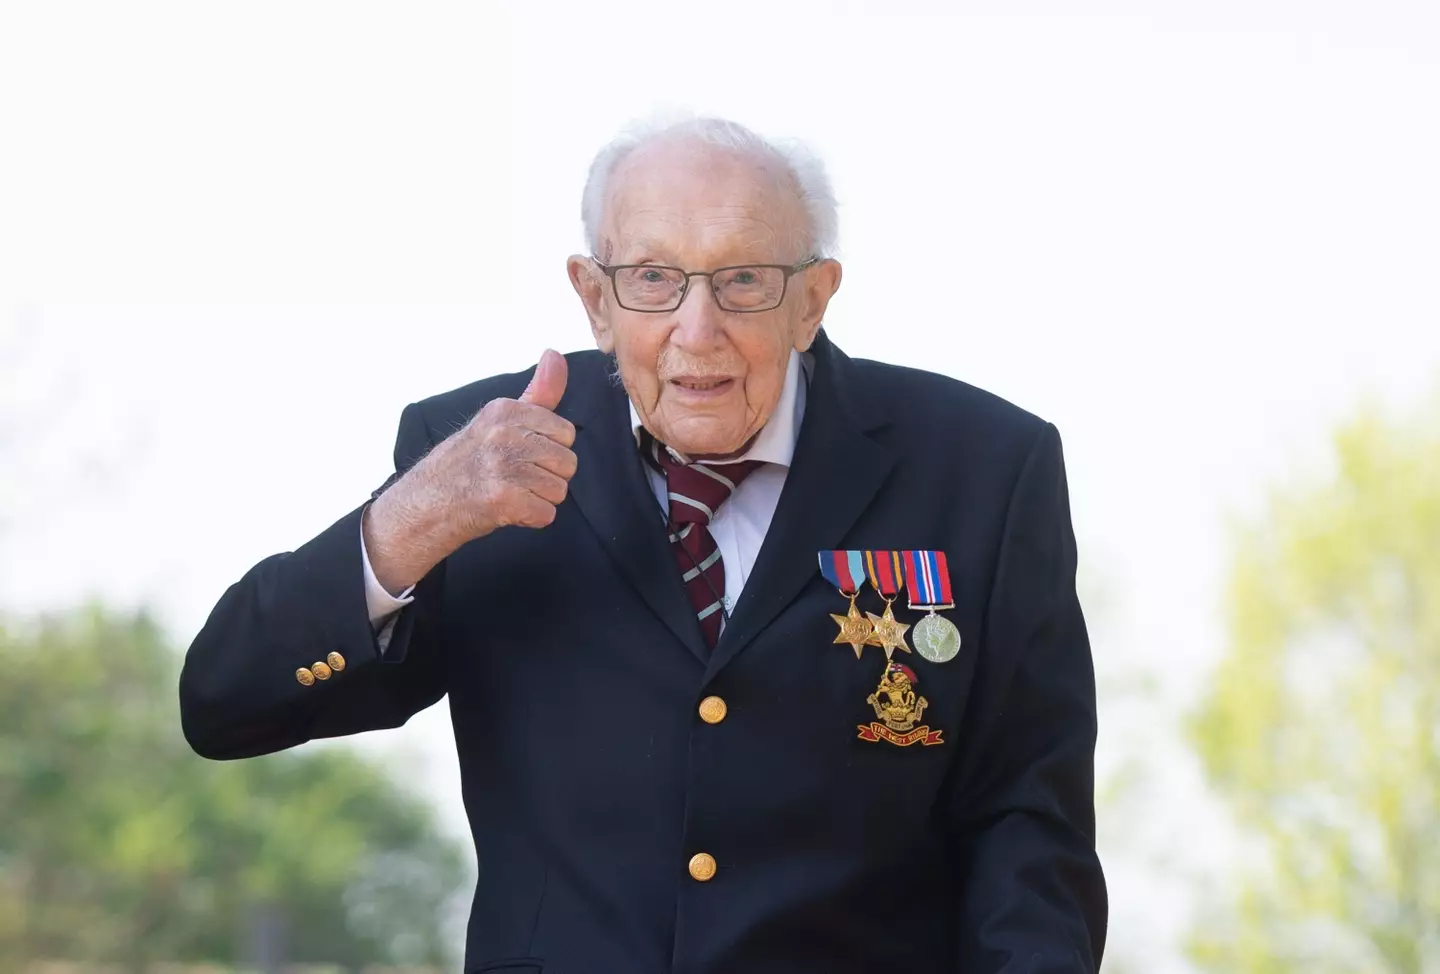 Sir Captain Tom Moore raised over £33 million for the NHS.